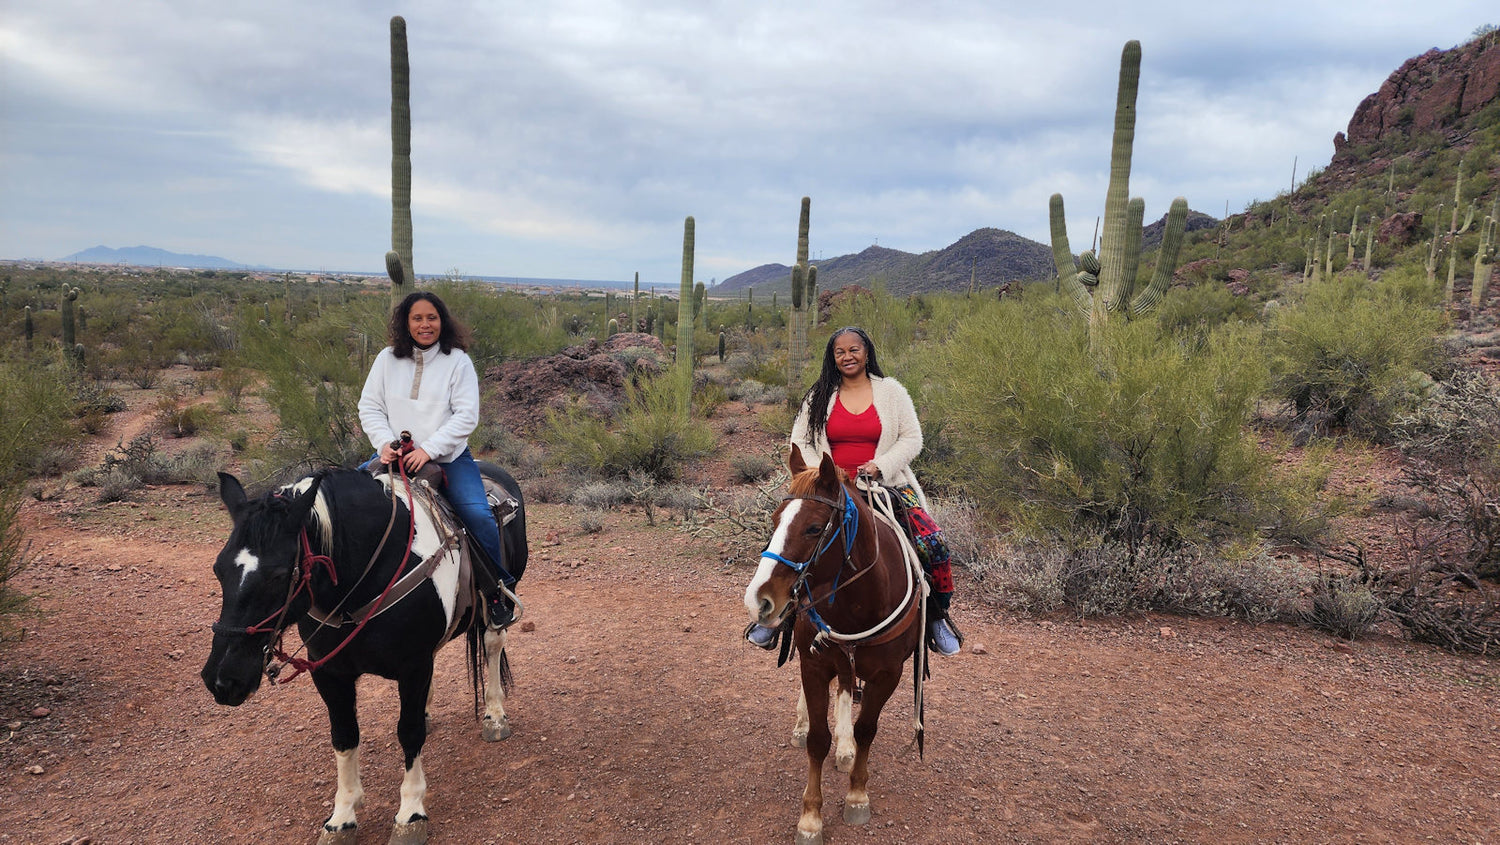 Mireille Liong Long Locs in Tucsan Arizona on a horse with niece Gaby